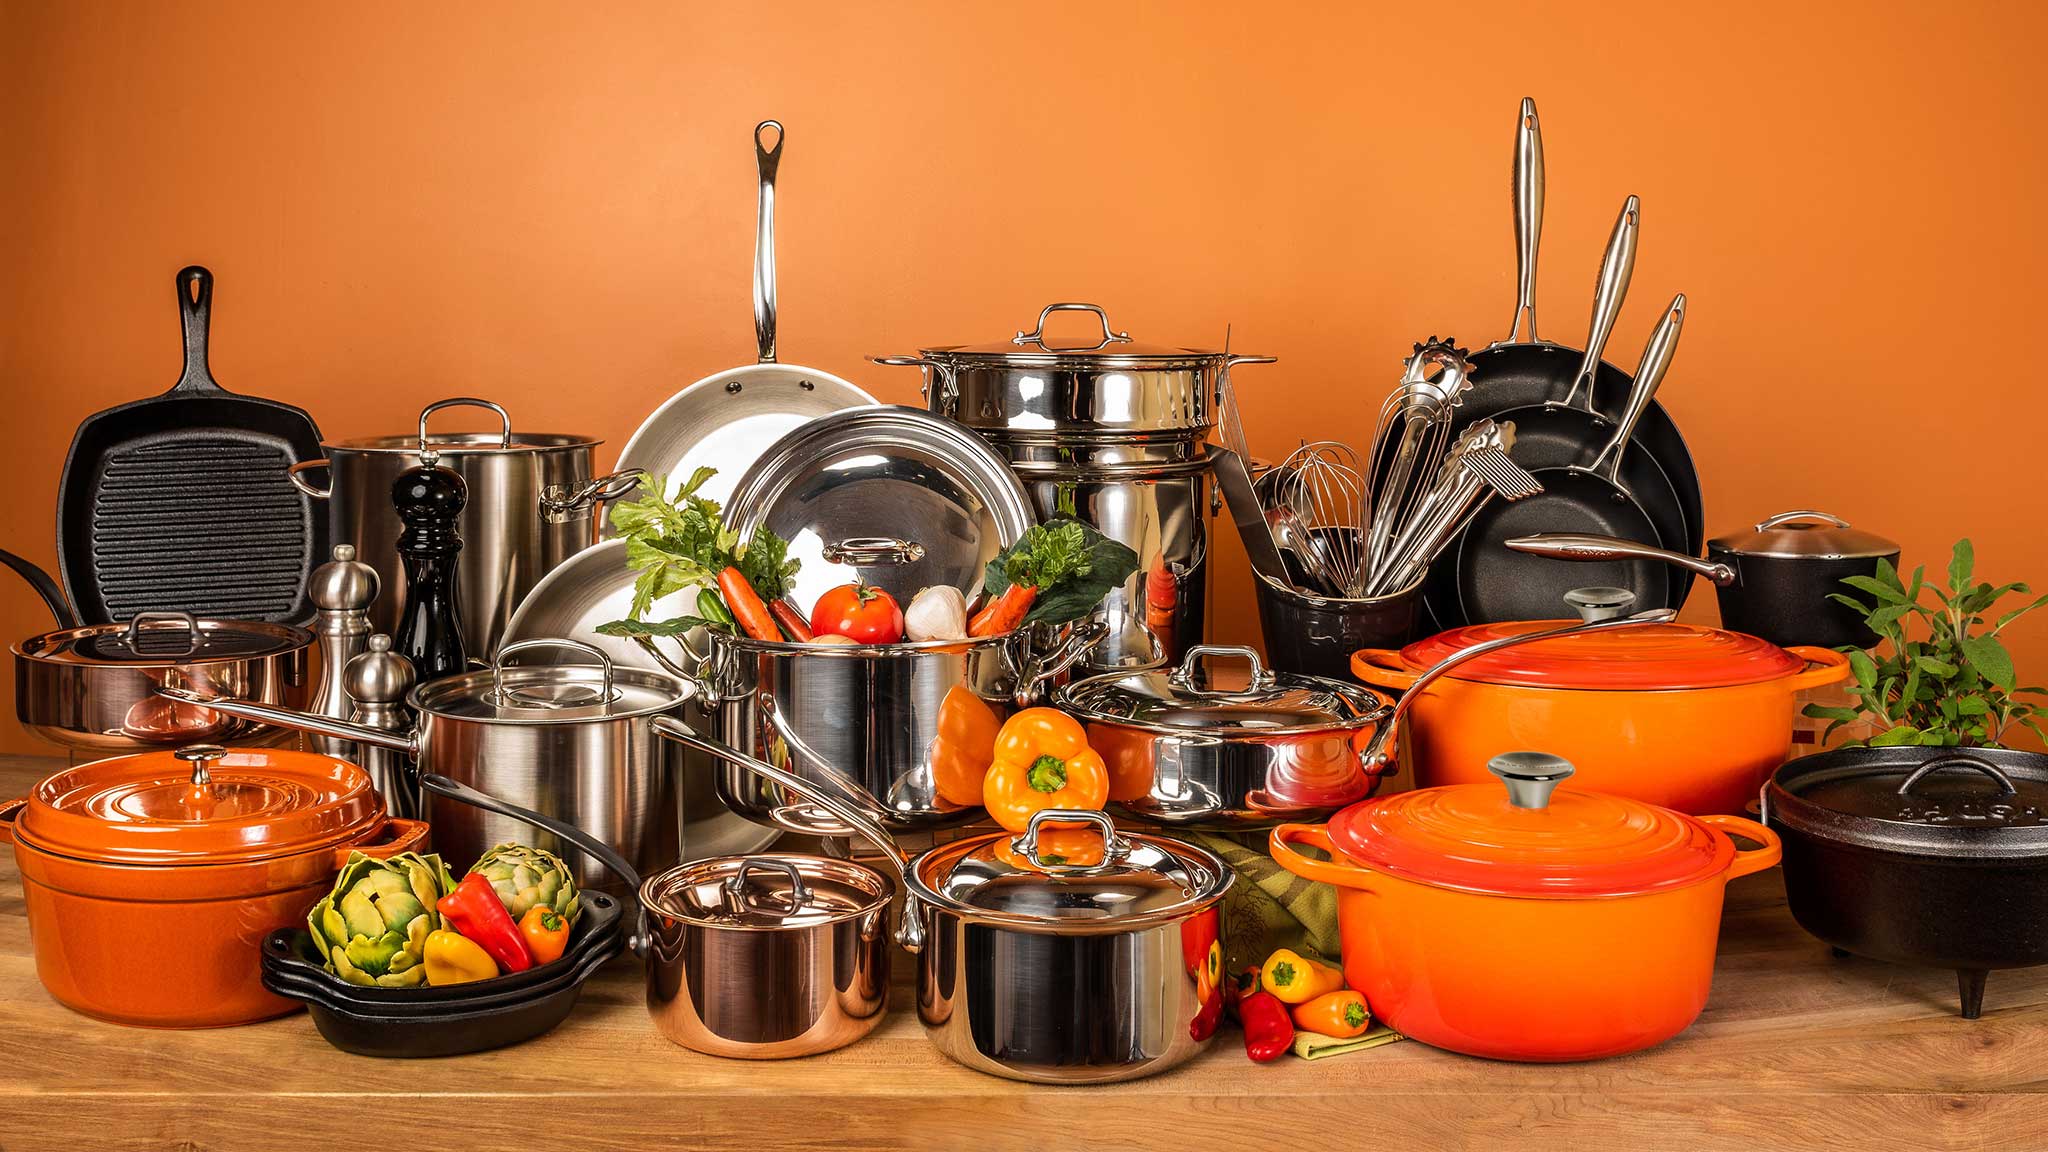 http://cdn.shopify.com/s/files/1/0453/8365/files/KitchenOutfitters-Cookware2021.jpg